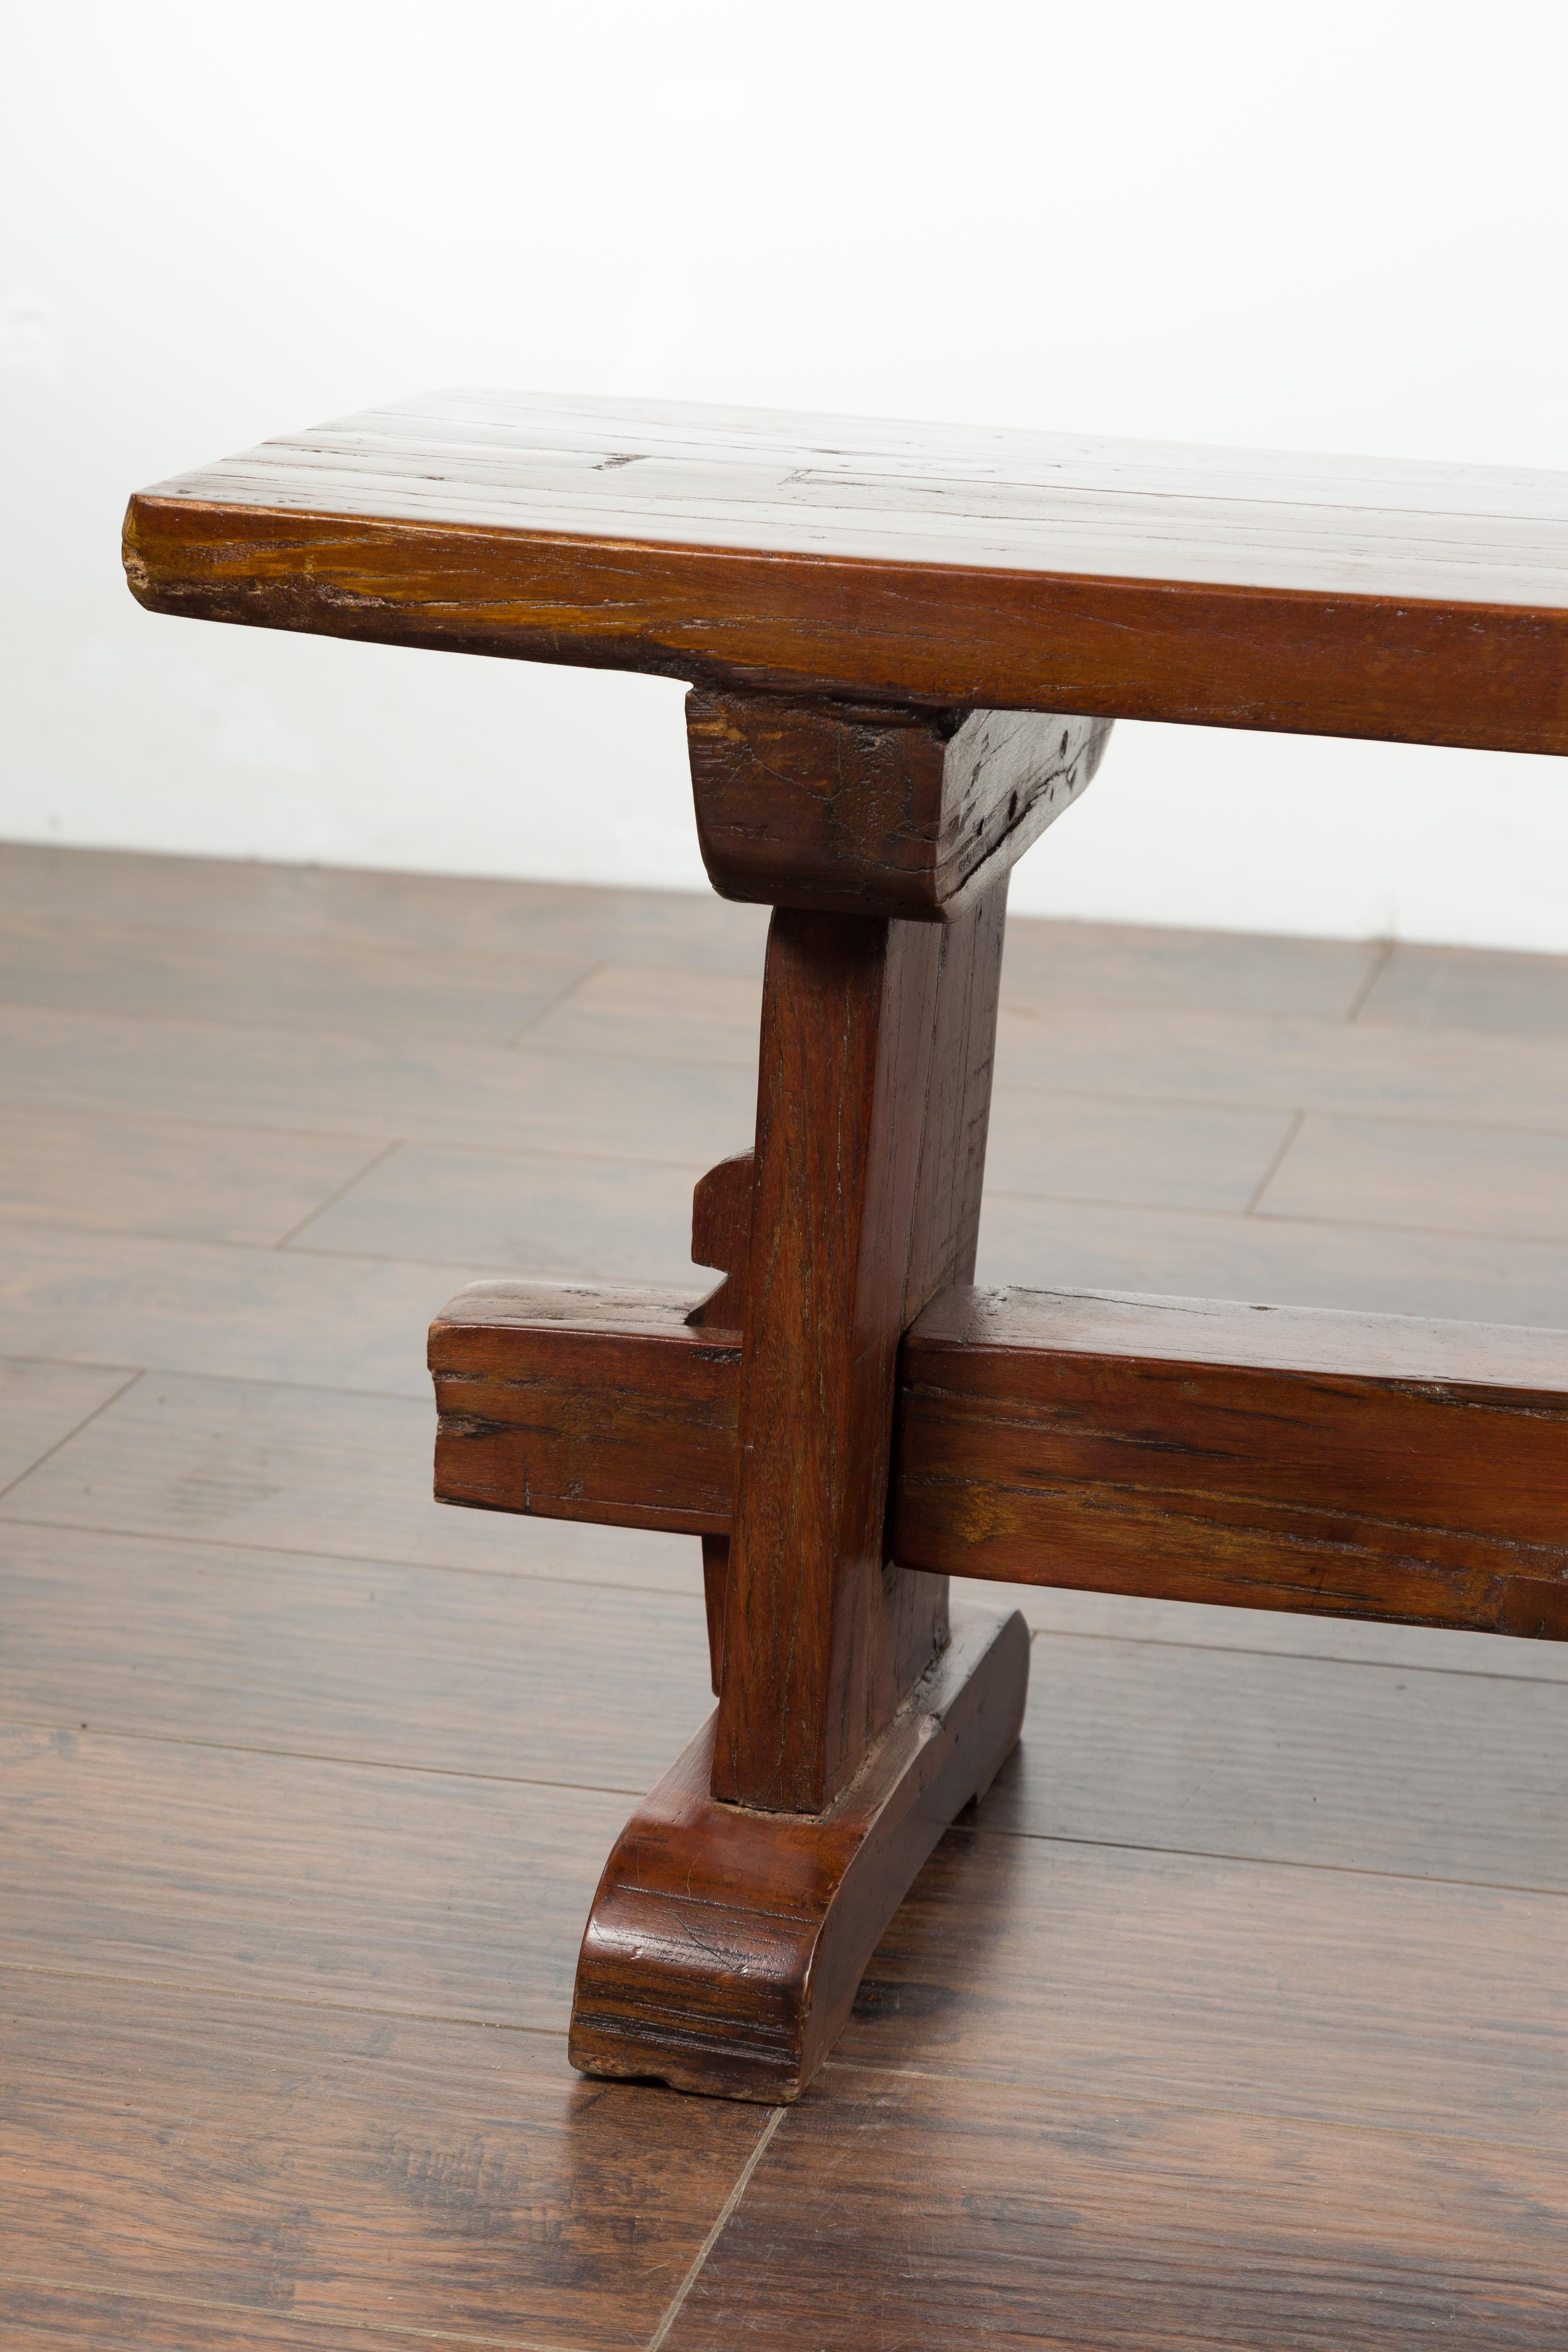 Italian Rustic Walnut Bench with Trestle Base from the Early 19th Century 2